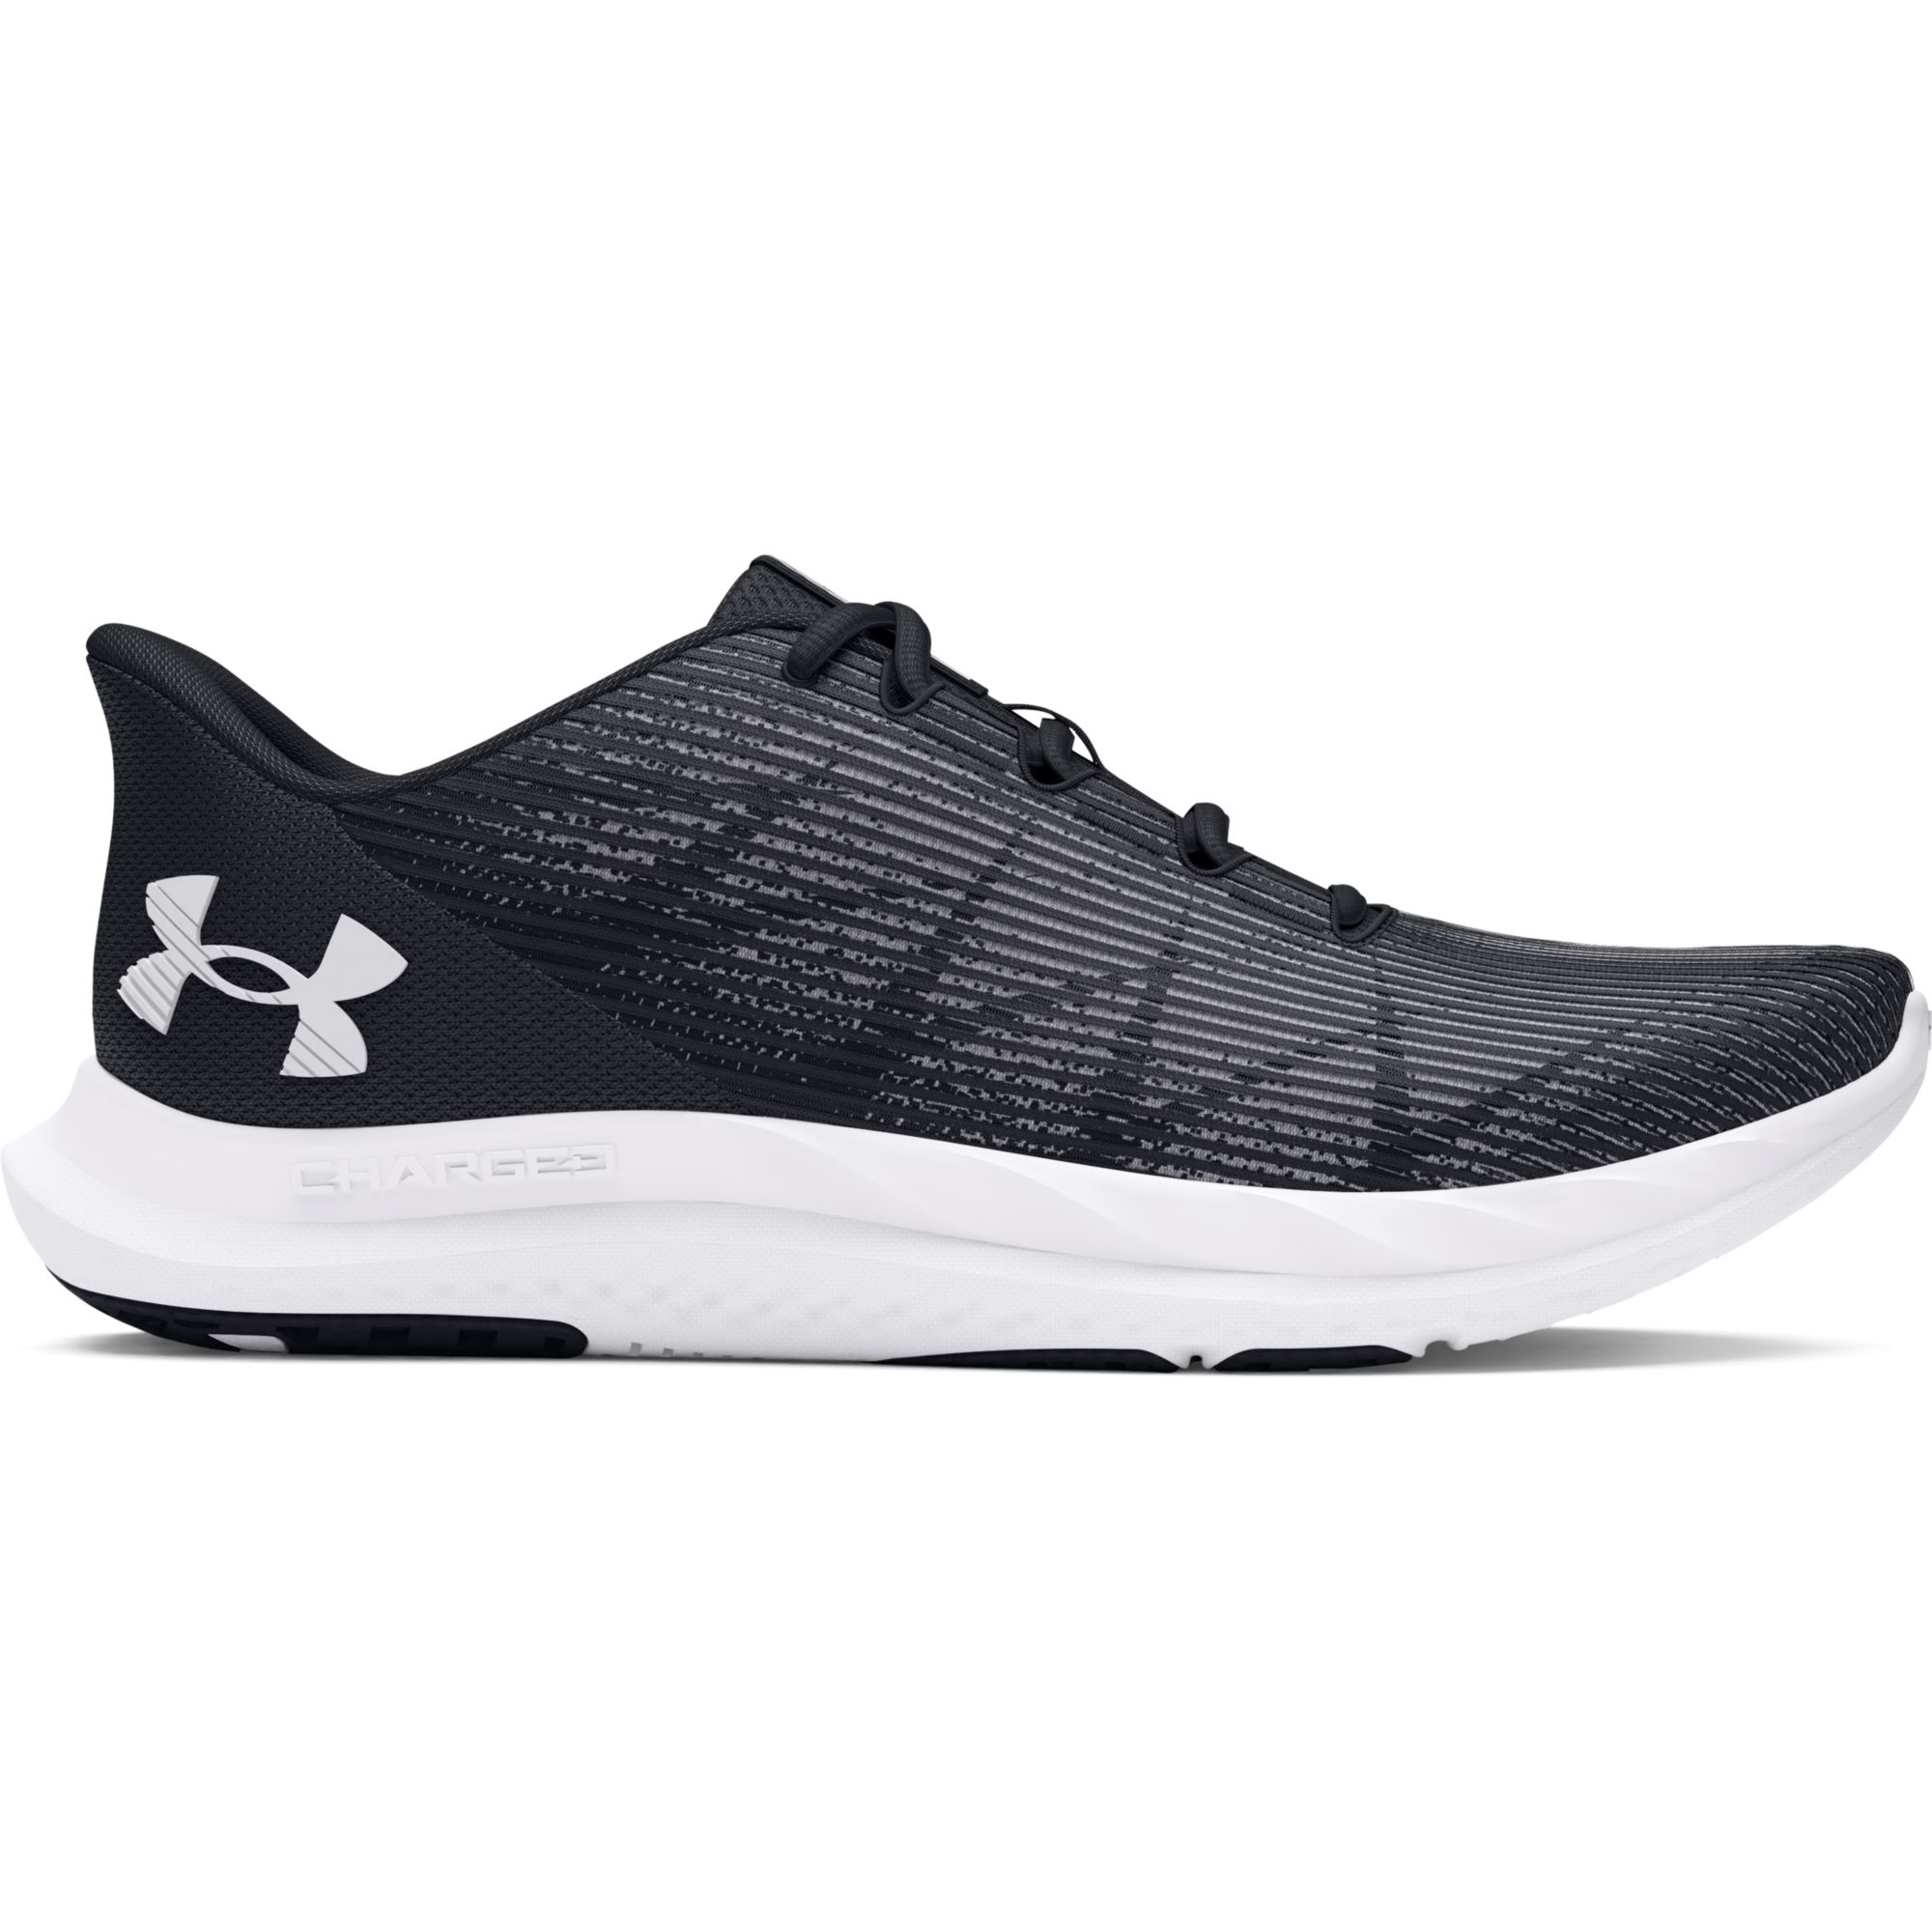 Charged Speed Swift Under Armour - 3341027